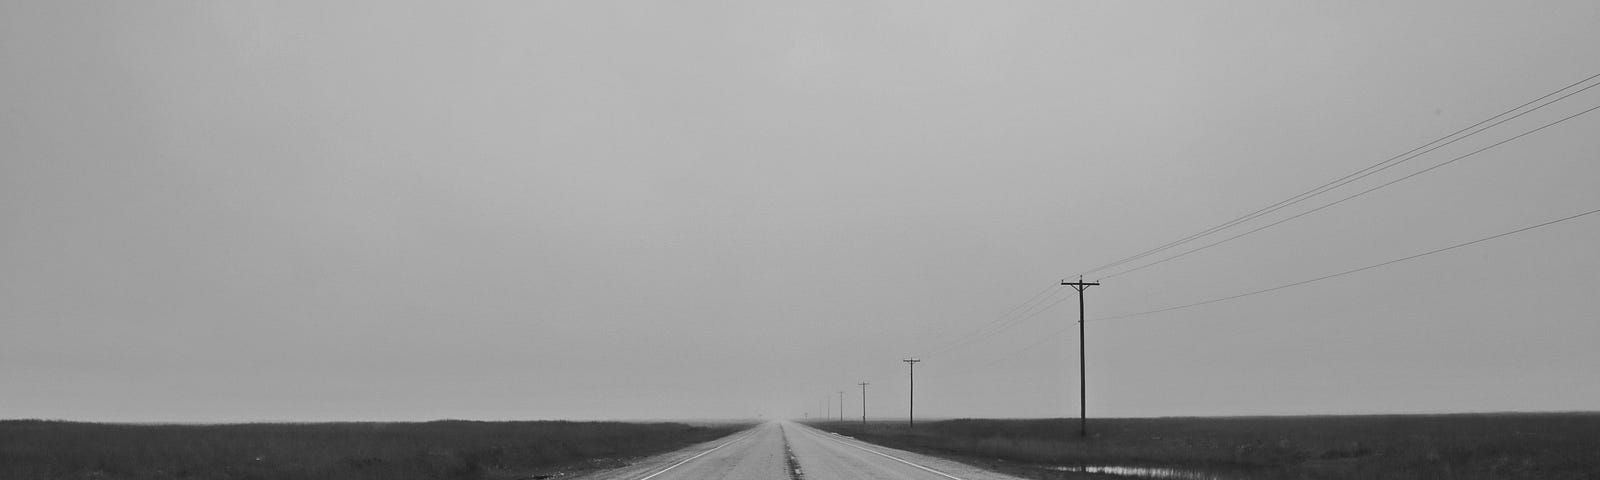 Black and white photo. Empty road stretching straight to horizon, through empty fields. No fences. Overcast day. Electric poles and wires stretched along right side of the road. A few shallow puddles.